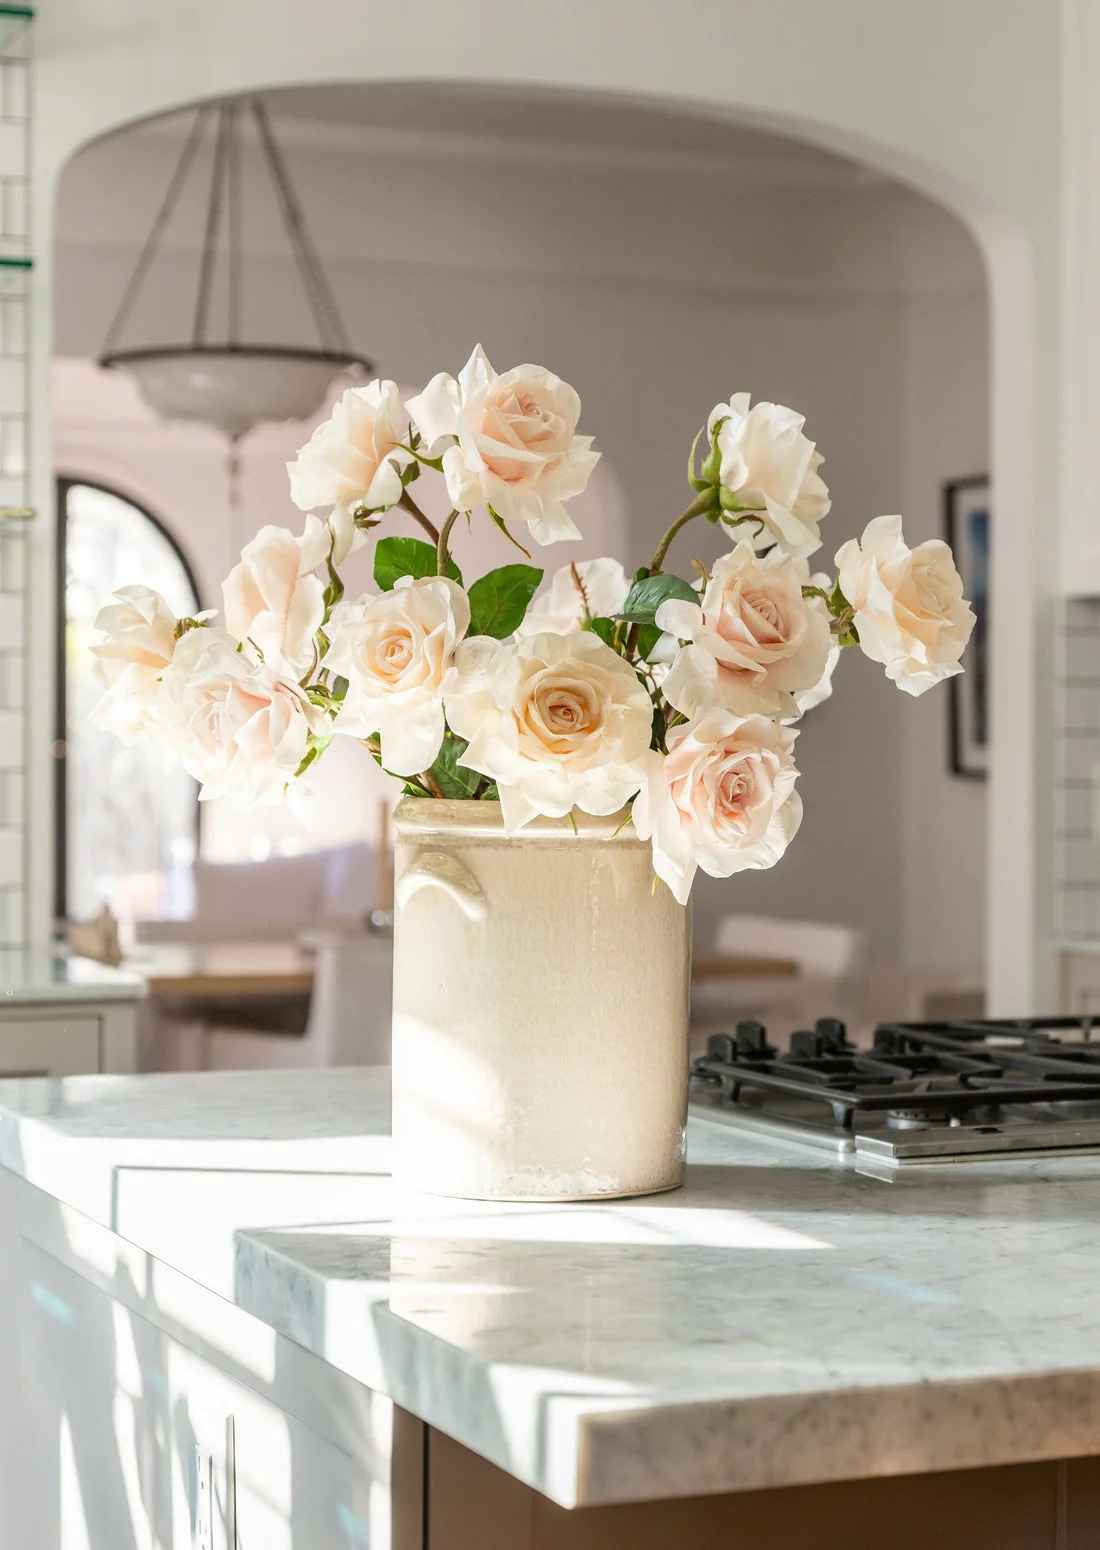 Where to Keep Flower Vase at Home-10 Best Ideas